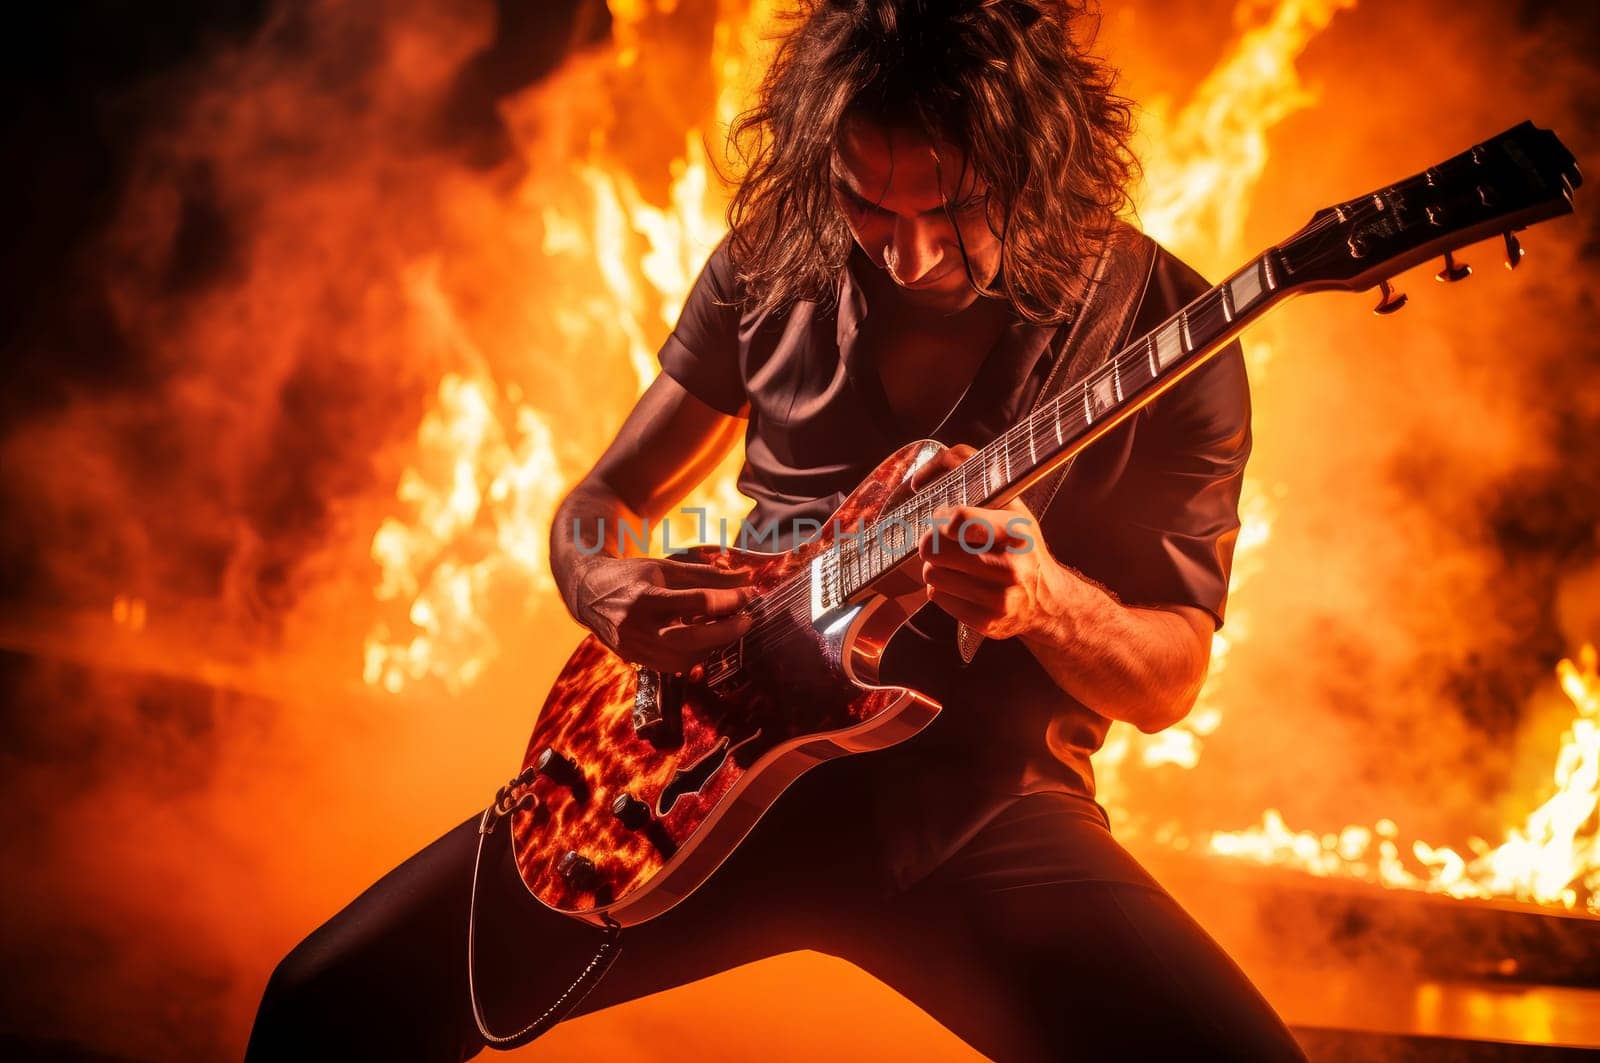 Electrifying Guitarist take on fire. Rock stage music by ylivdesign